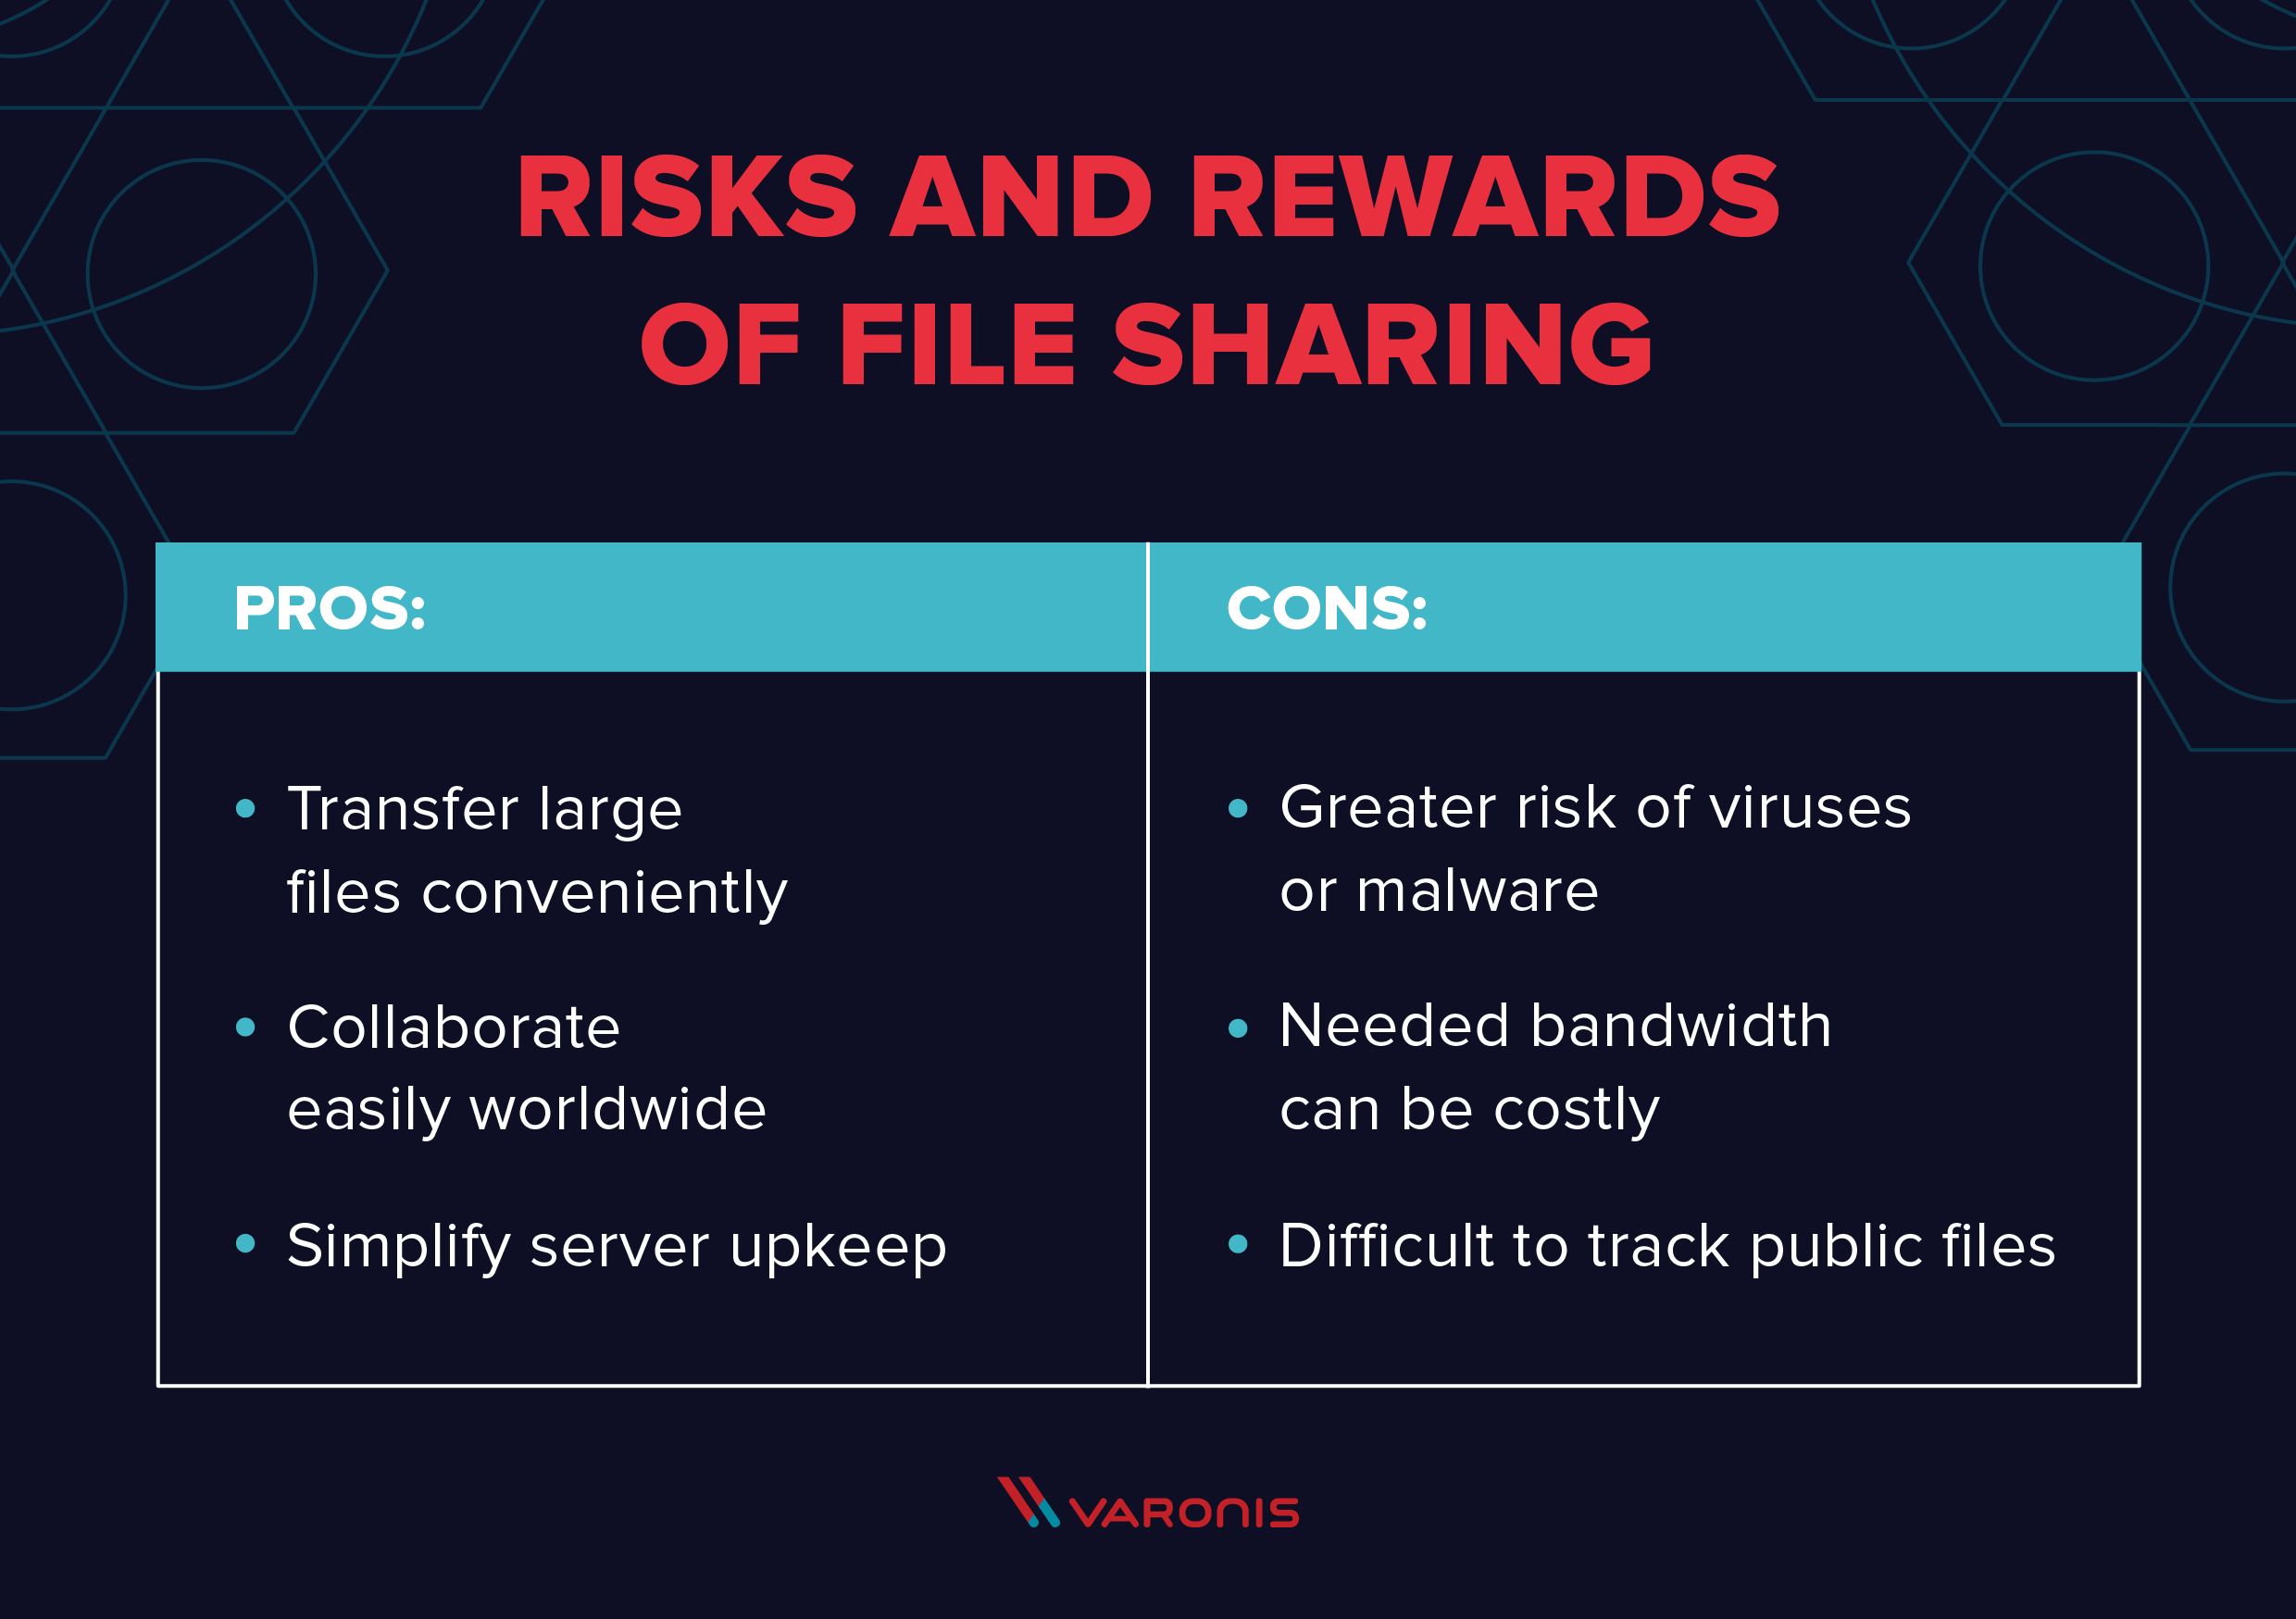 the risks and rewards of file sharing listed